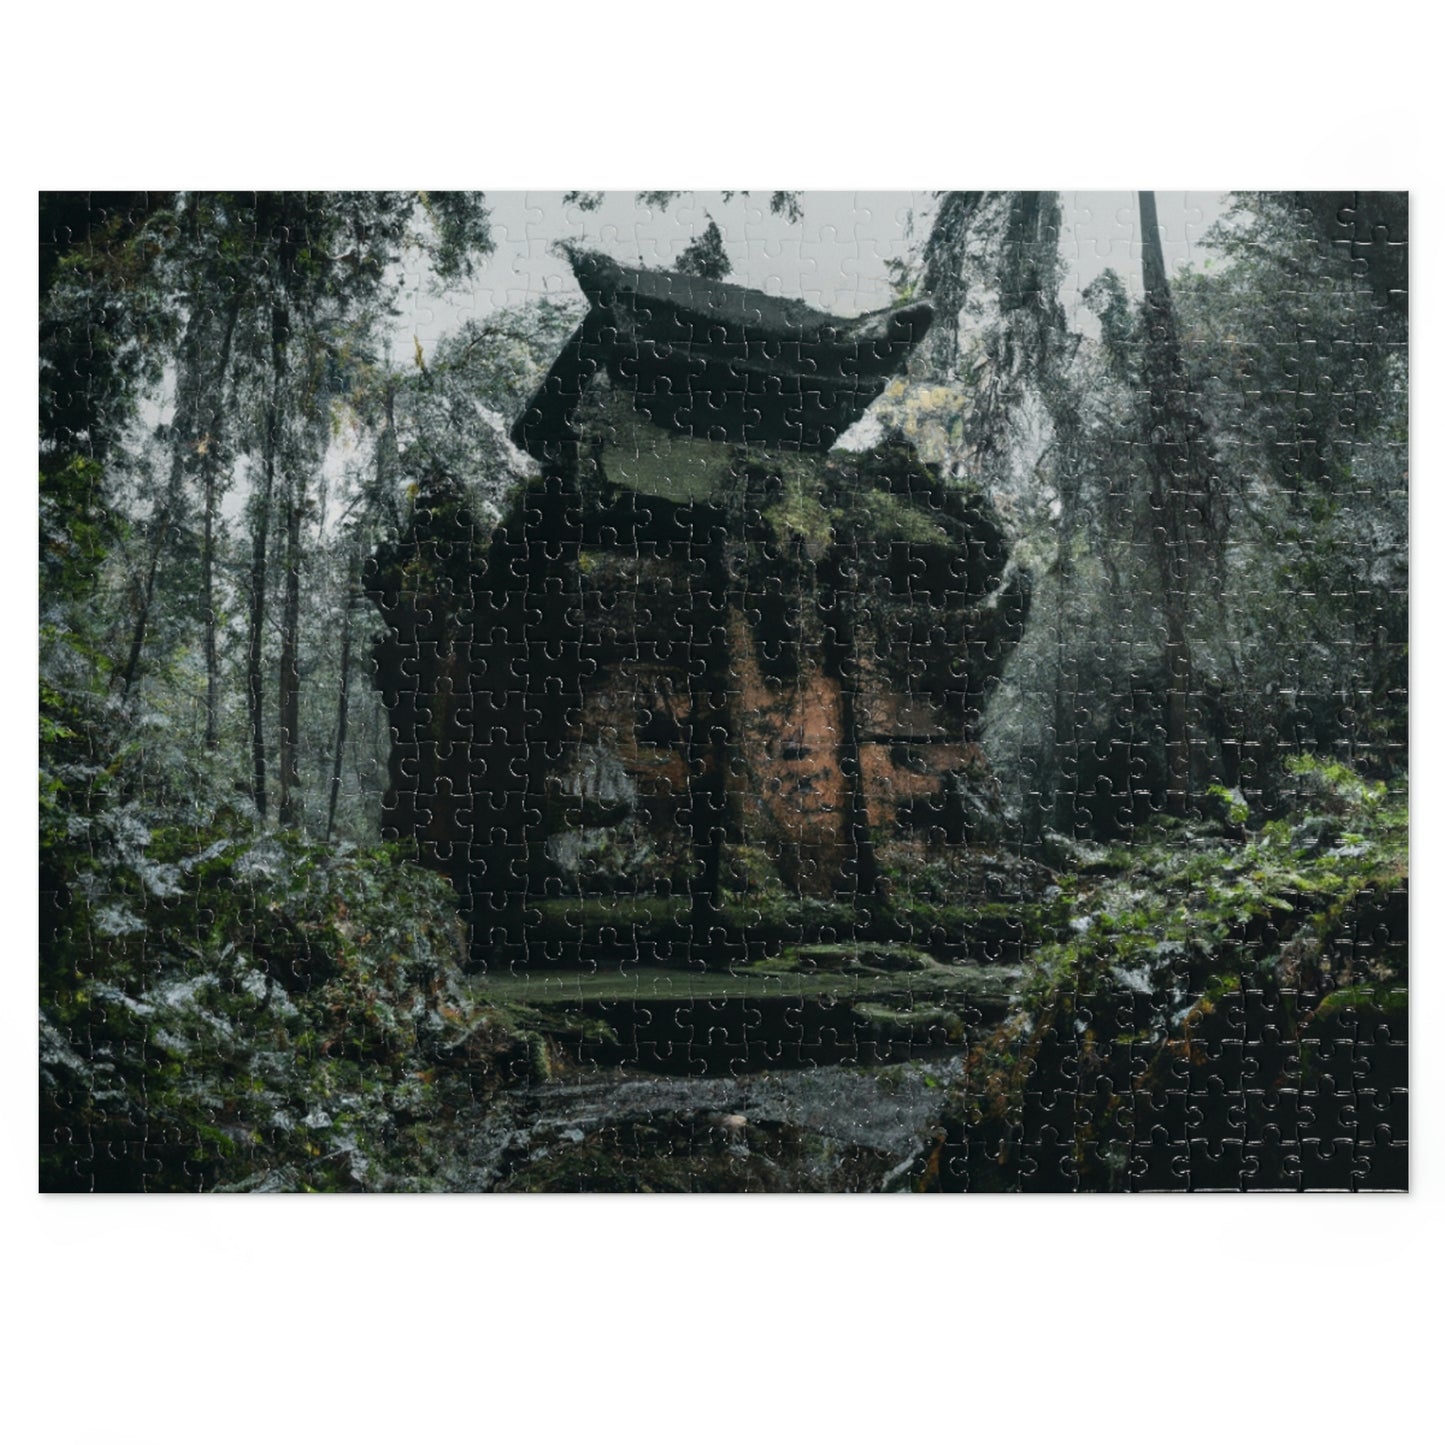 "The Lost Relic of the Jungle" - The Alien Jigsaw Puzzle